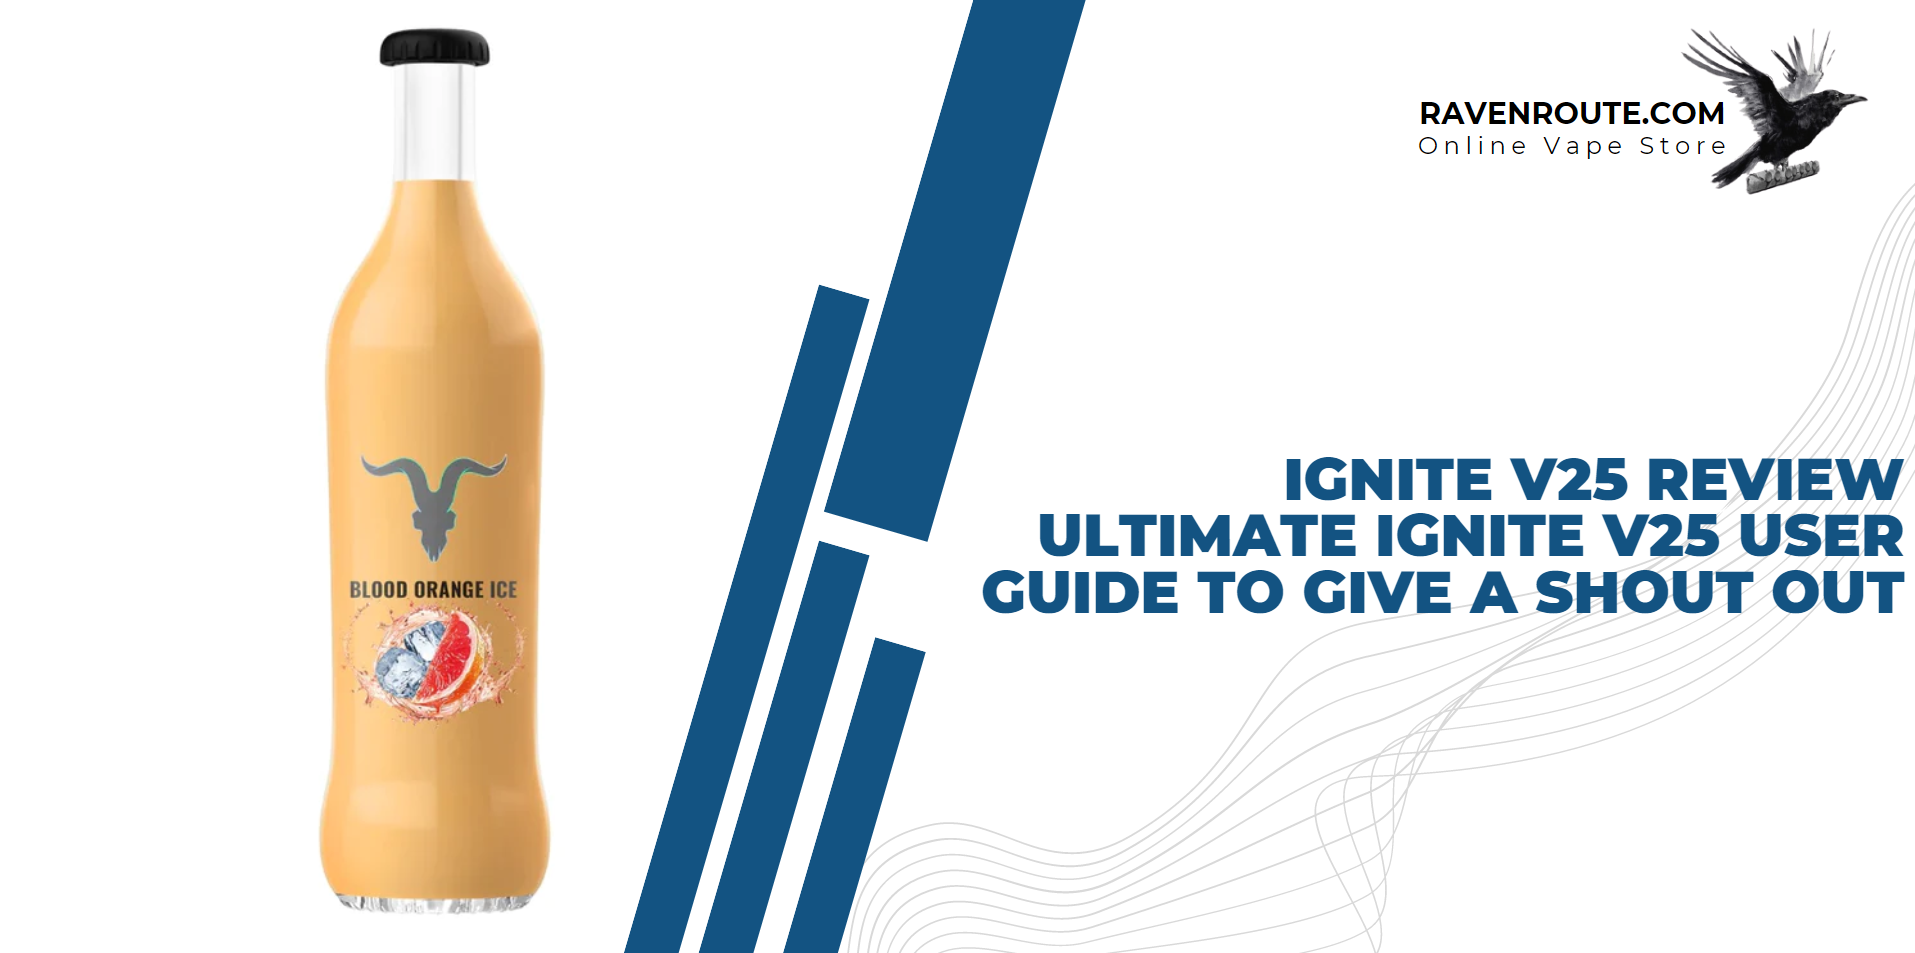 Ignite V25 Review - Ultimate Ignite V25 User Guide to Give A Shout Out